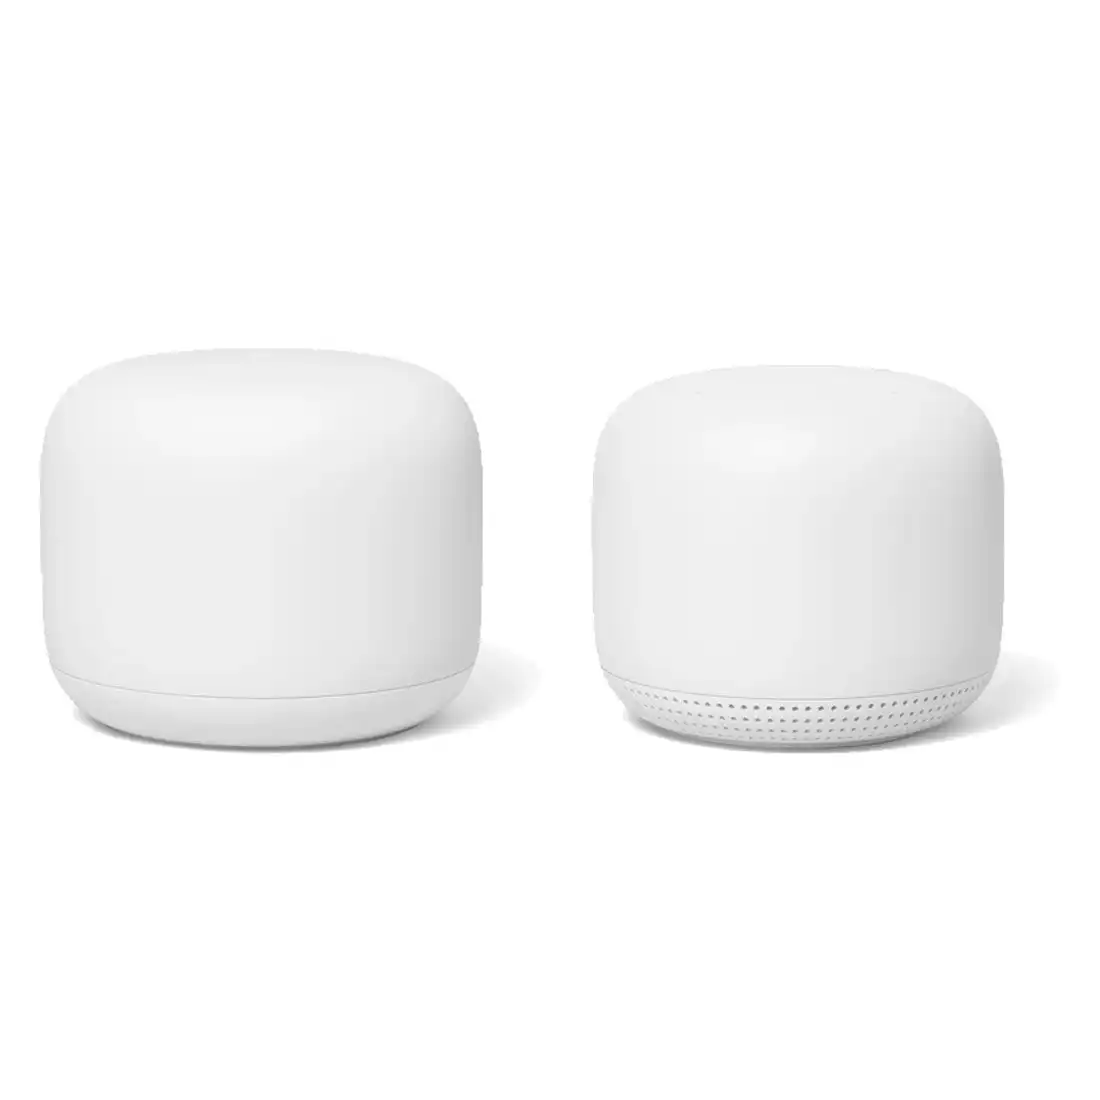 Google Nest WiFi Home Mesh Router 2 Pack GA00822 - 1 Base Unit and 1 Wifi Points Unit